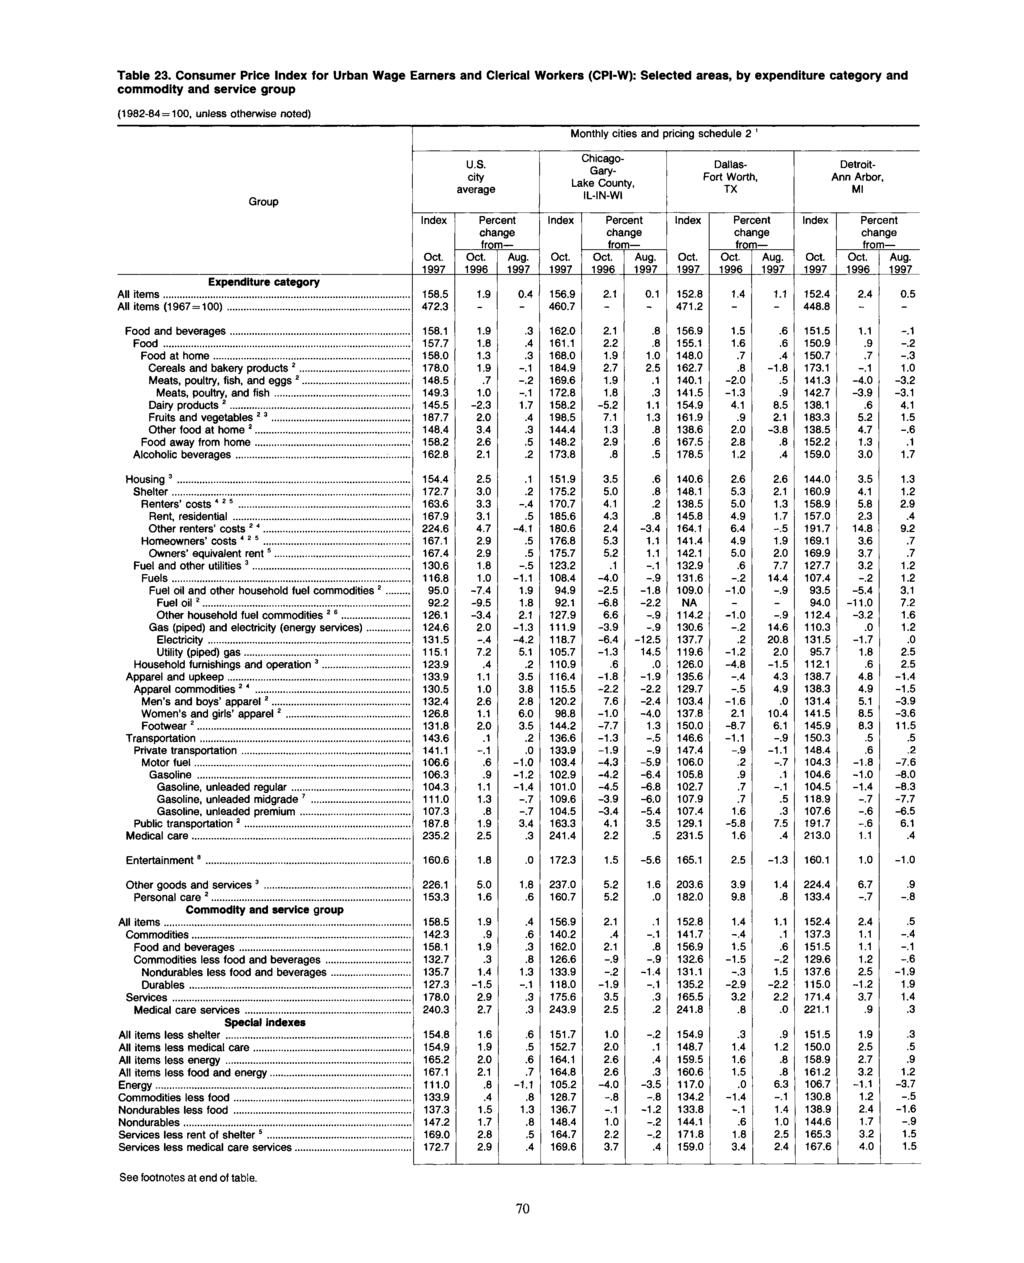 Table 23. Consumer Price for Urban Wage Earners and Clerical Workers (CPI-W): Selected areas, by expenditure category and commodity and service group Group U.S. city average Percent from Aug.